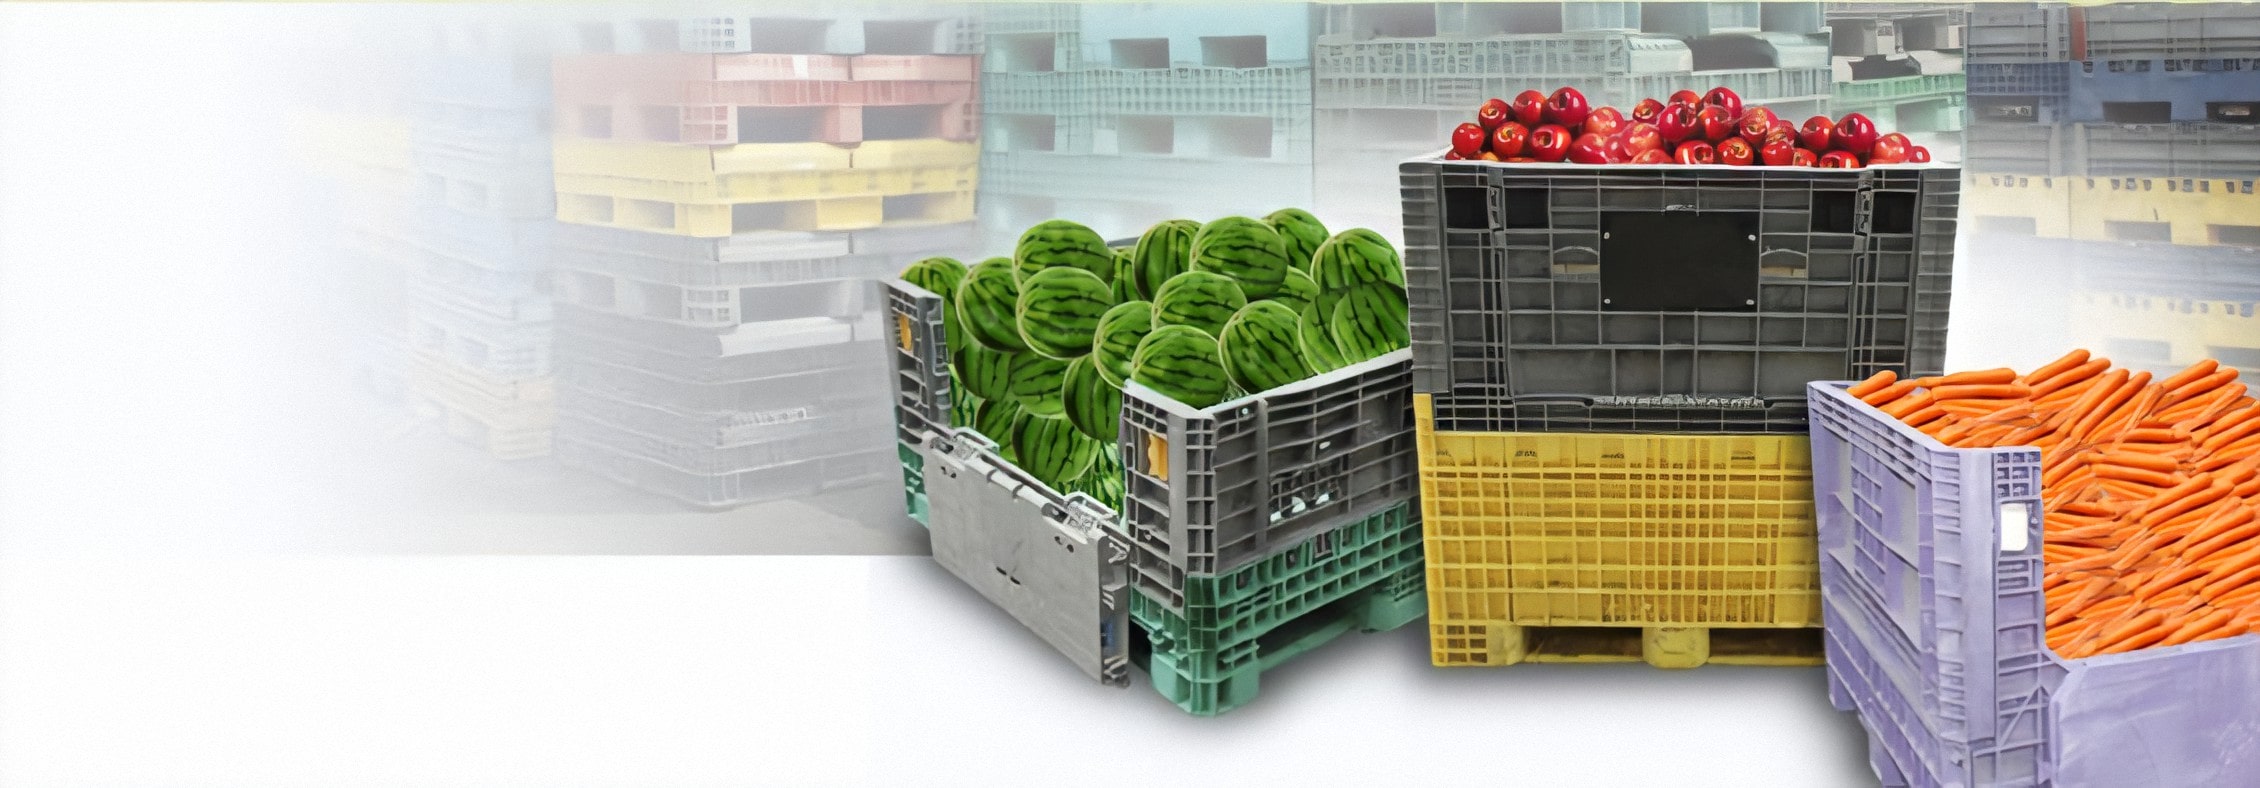 https://www.green-processing.com/wp-content/uploads/2020/04/plastic-produce-containers.jpg